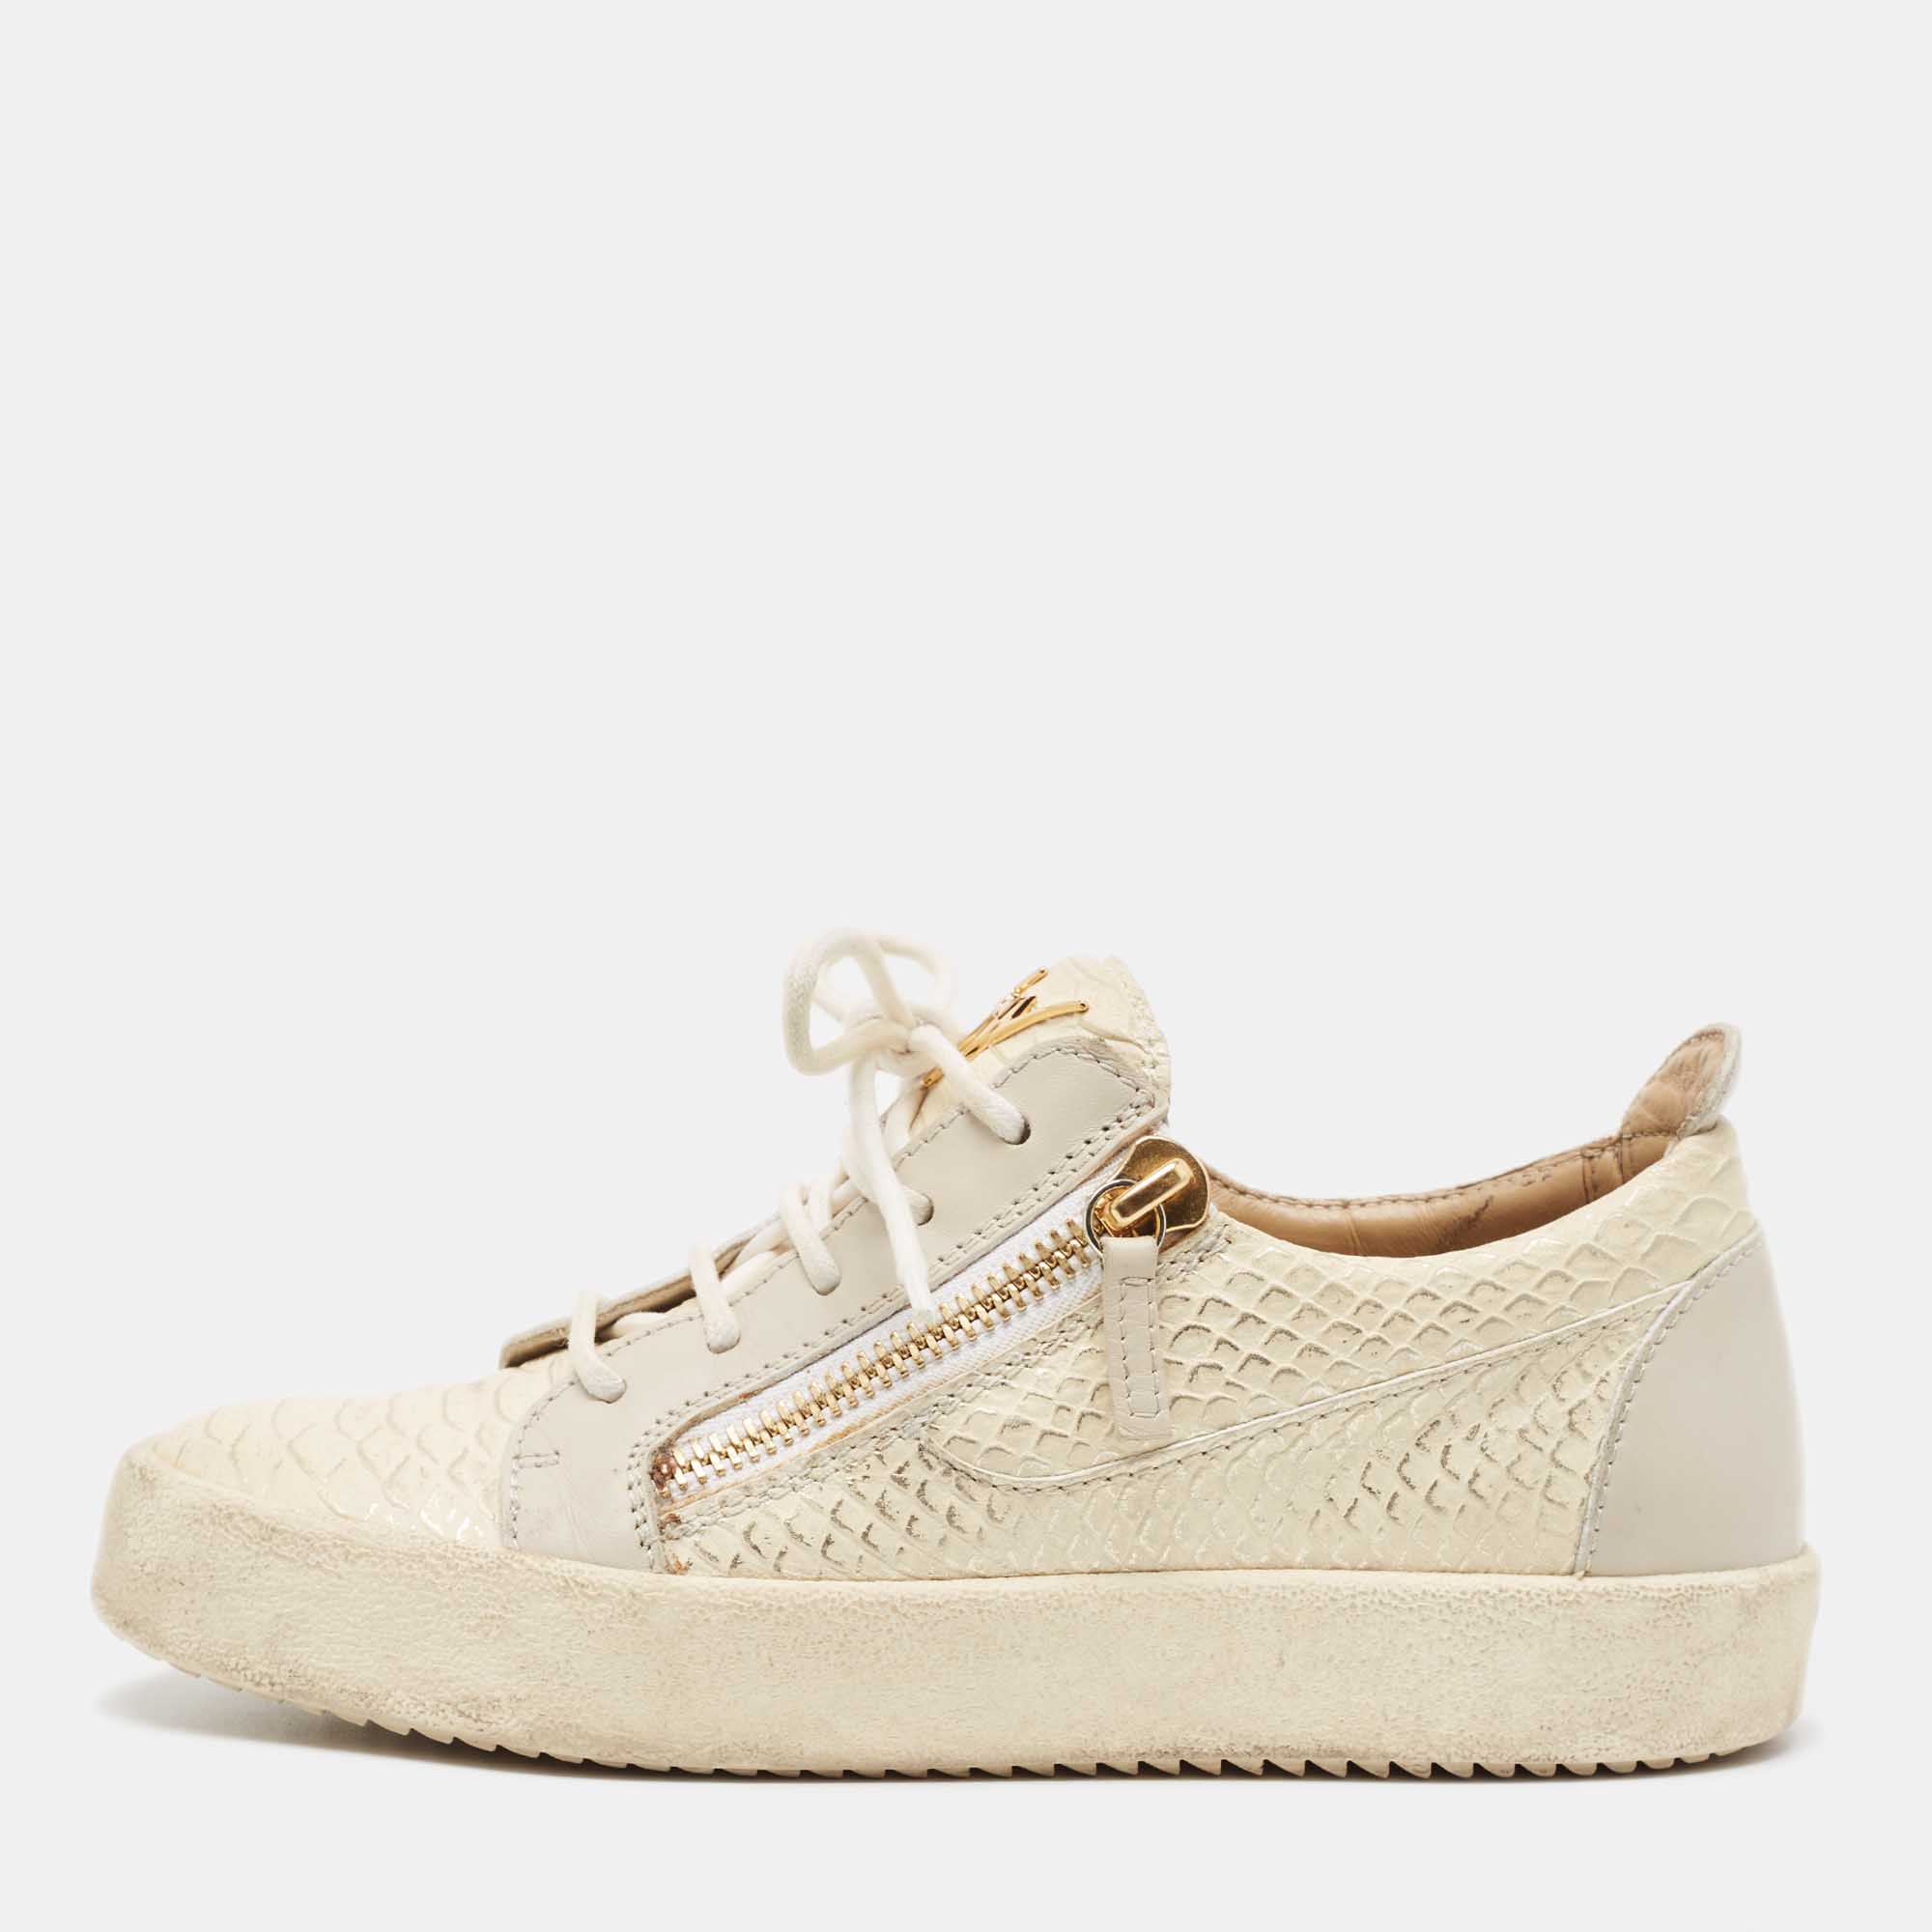 

Giuseppe Zanotti Cream/Grey Embossed Python and Leather Frankie Sneakers Size